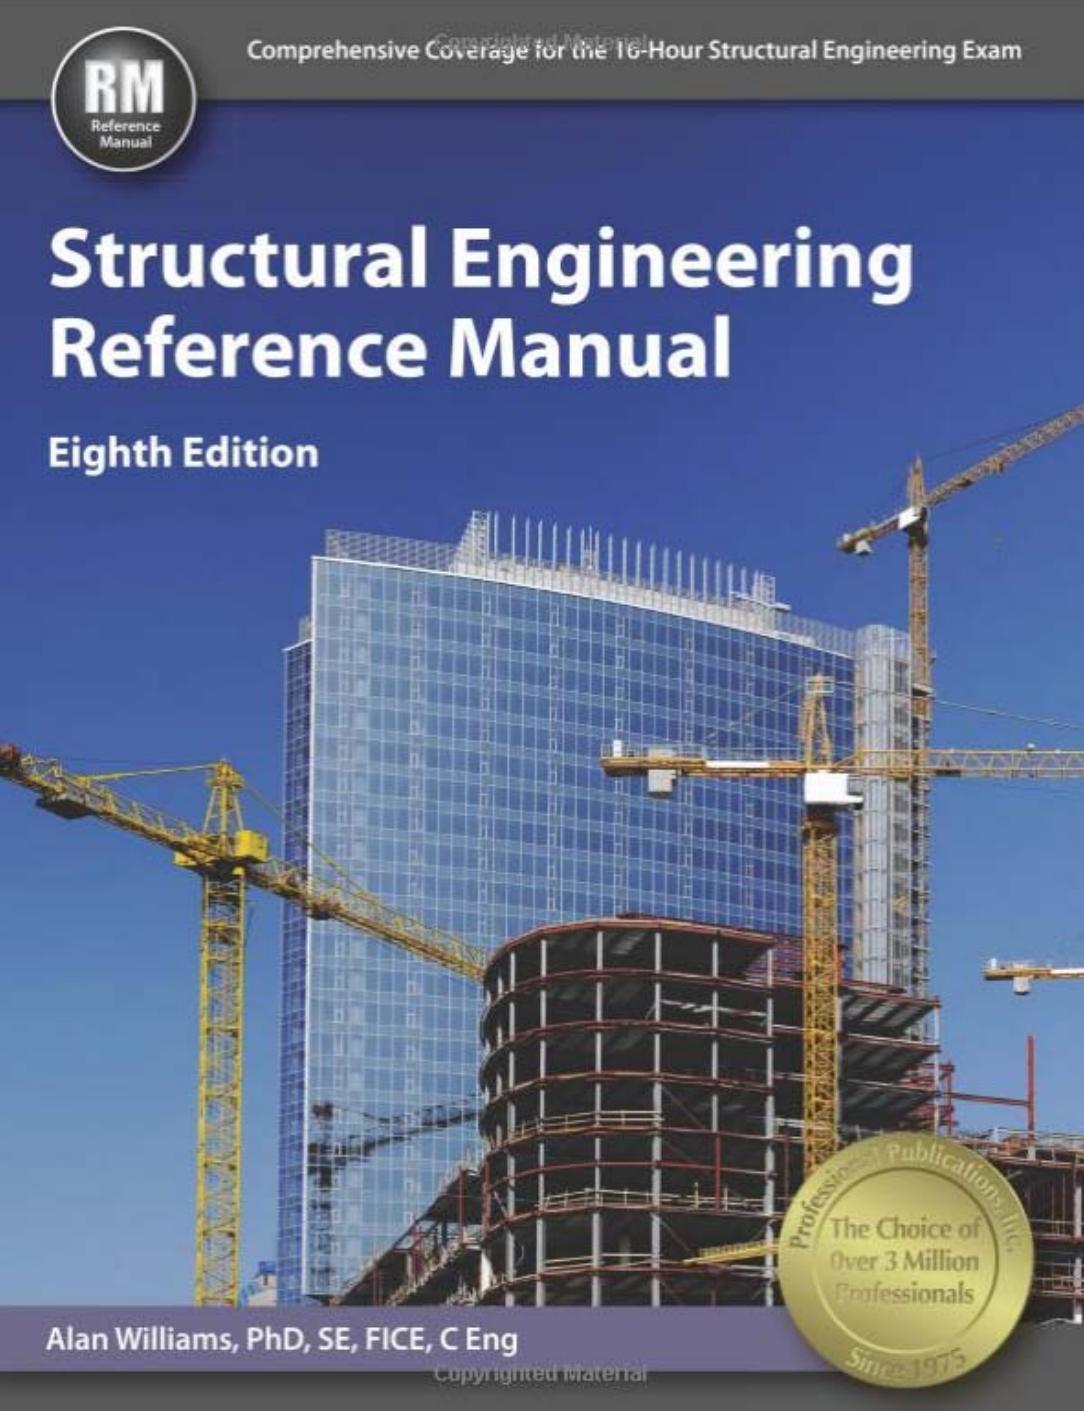 Structural Engineering Reference Manual, Eighth Edition